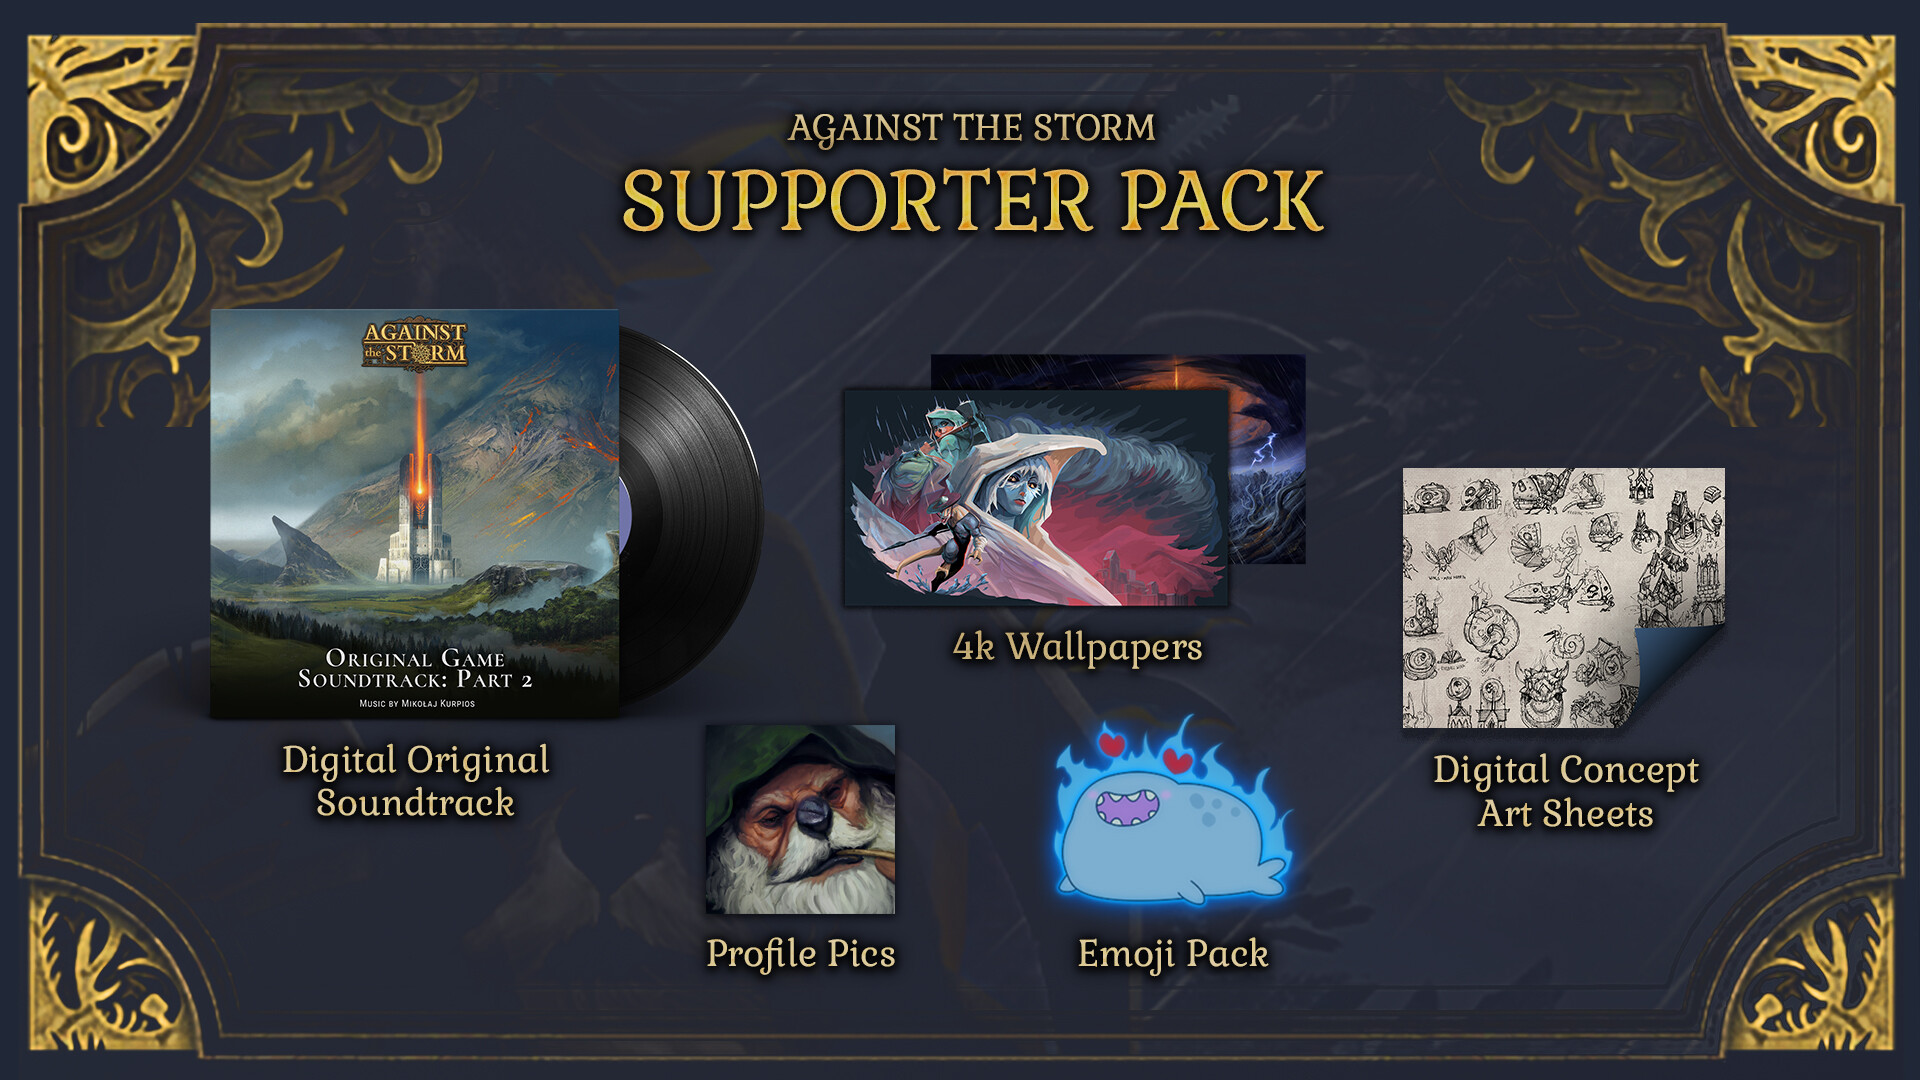 Against the Storm - Supporter Pack DLC Steam CD Key 7.74 usd